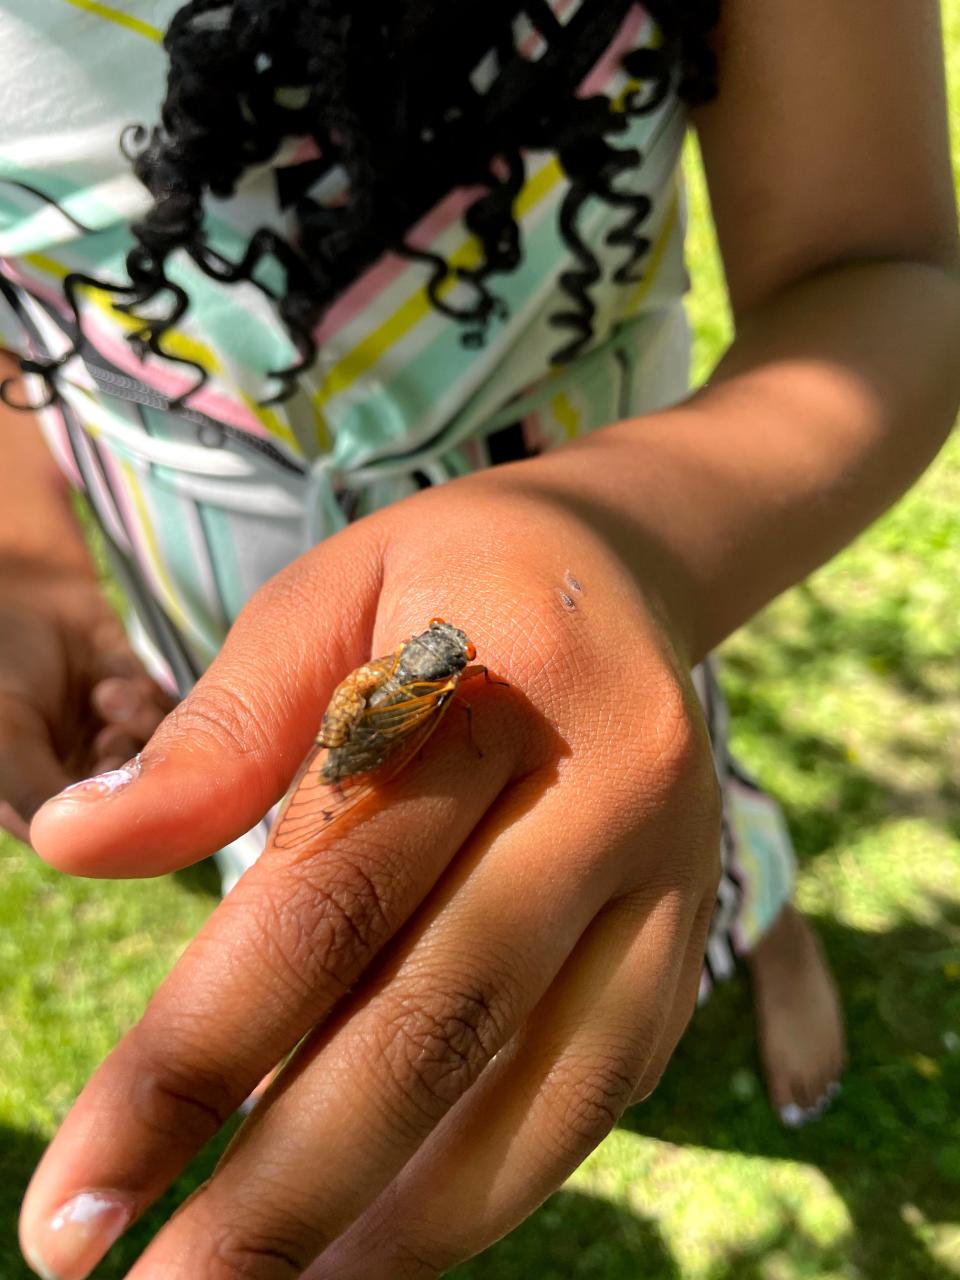 A student from teacher Nancy Murtaugh's fourth grade class in Fairfield, Ohio, shows off a periodical cicada that landed on her during a class outing in 2021.